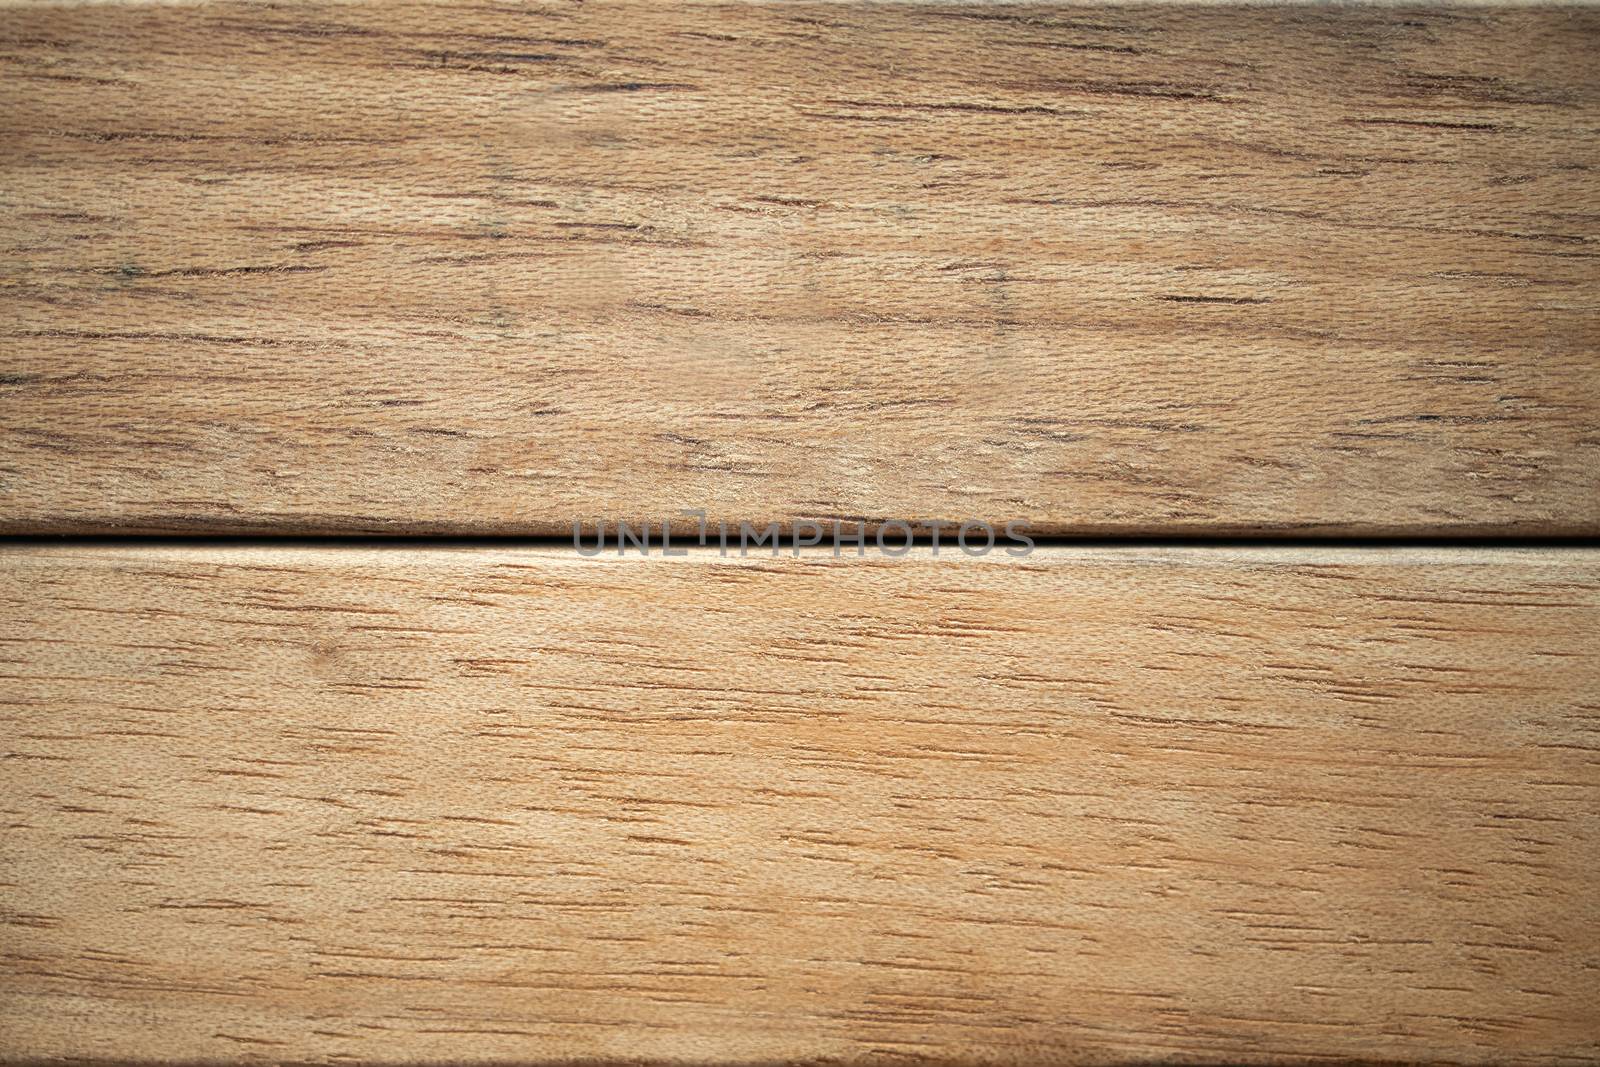 Wooden plank background by Nawoot